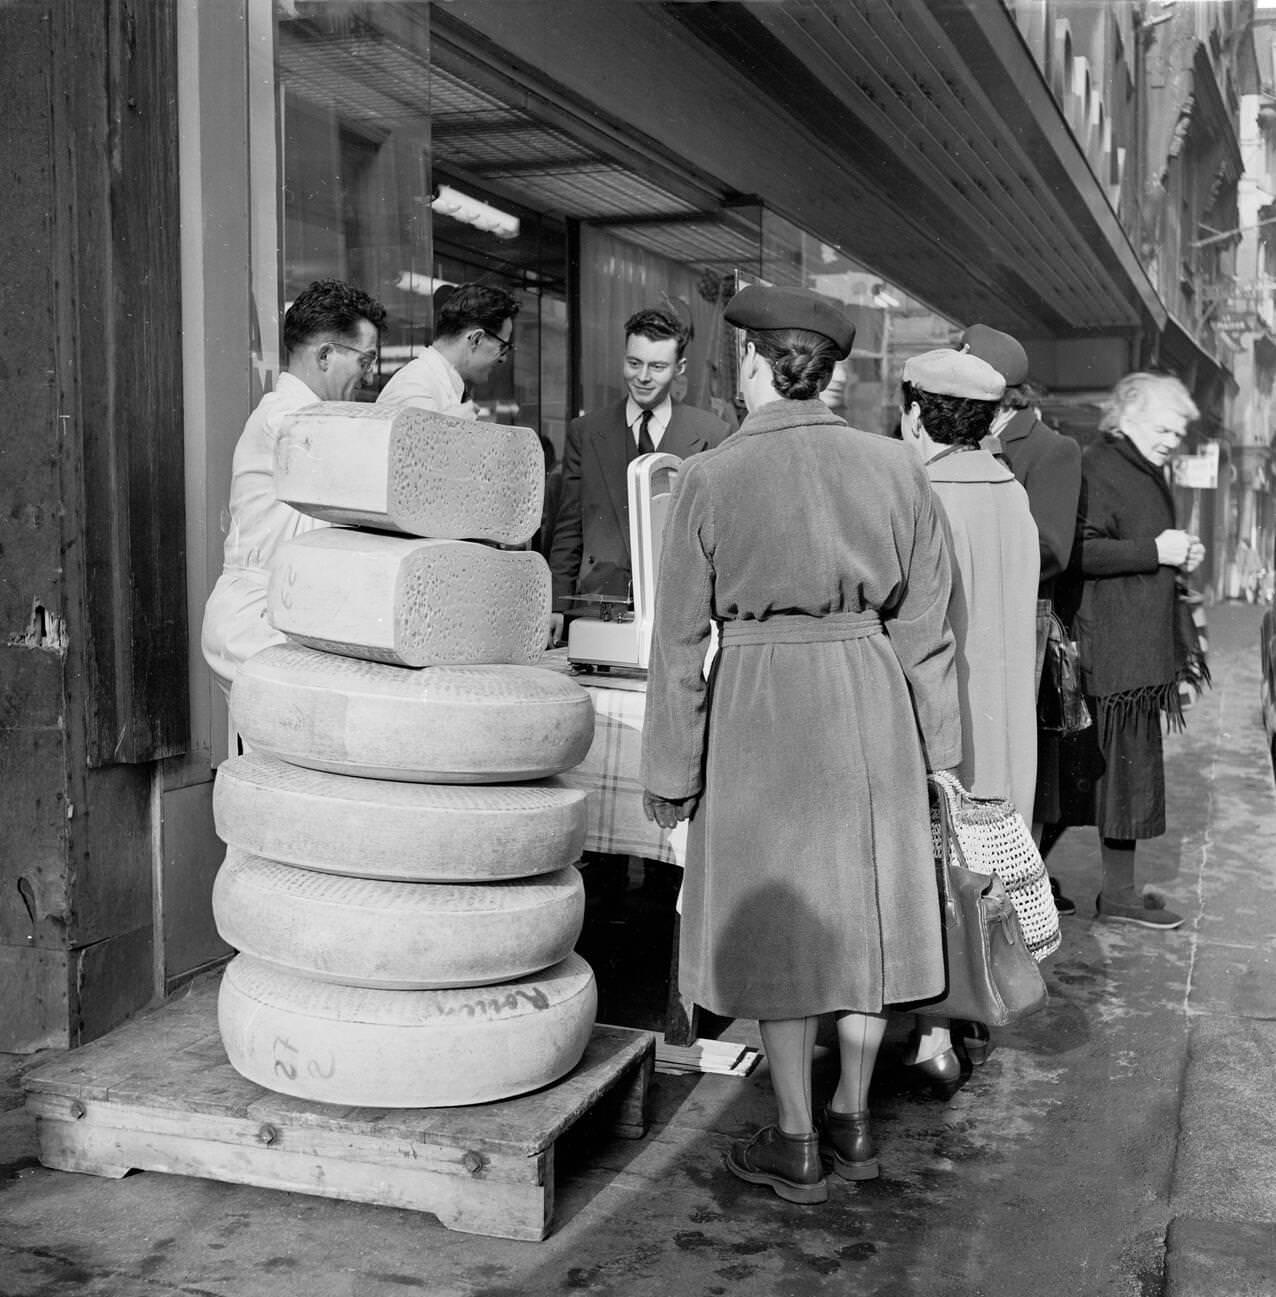 Female Shoppers in Rouen, Examining Cheese in the Street, France, 1950s